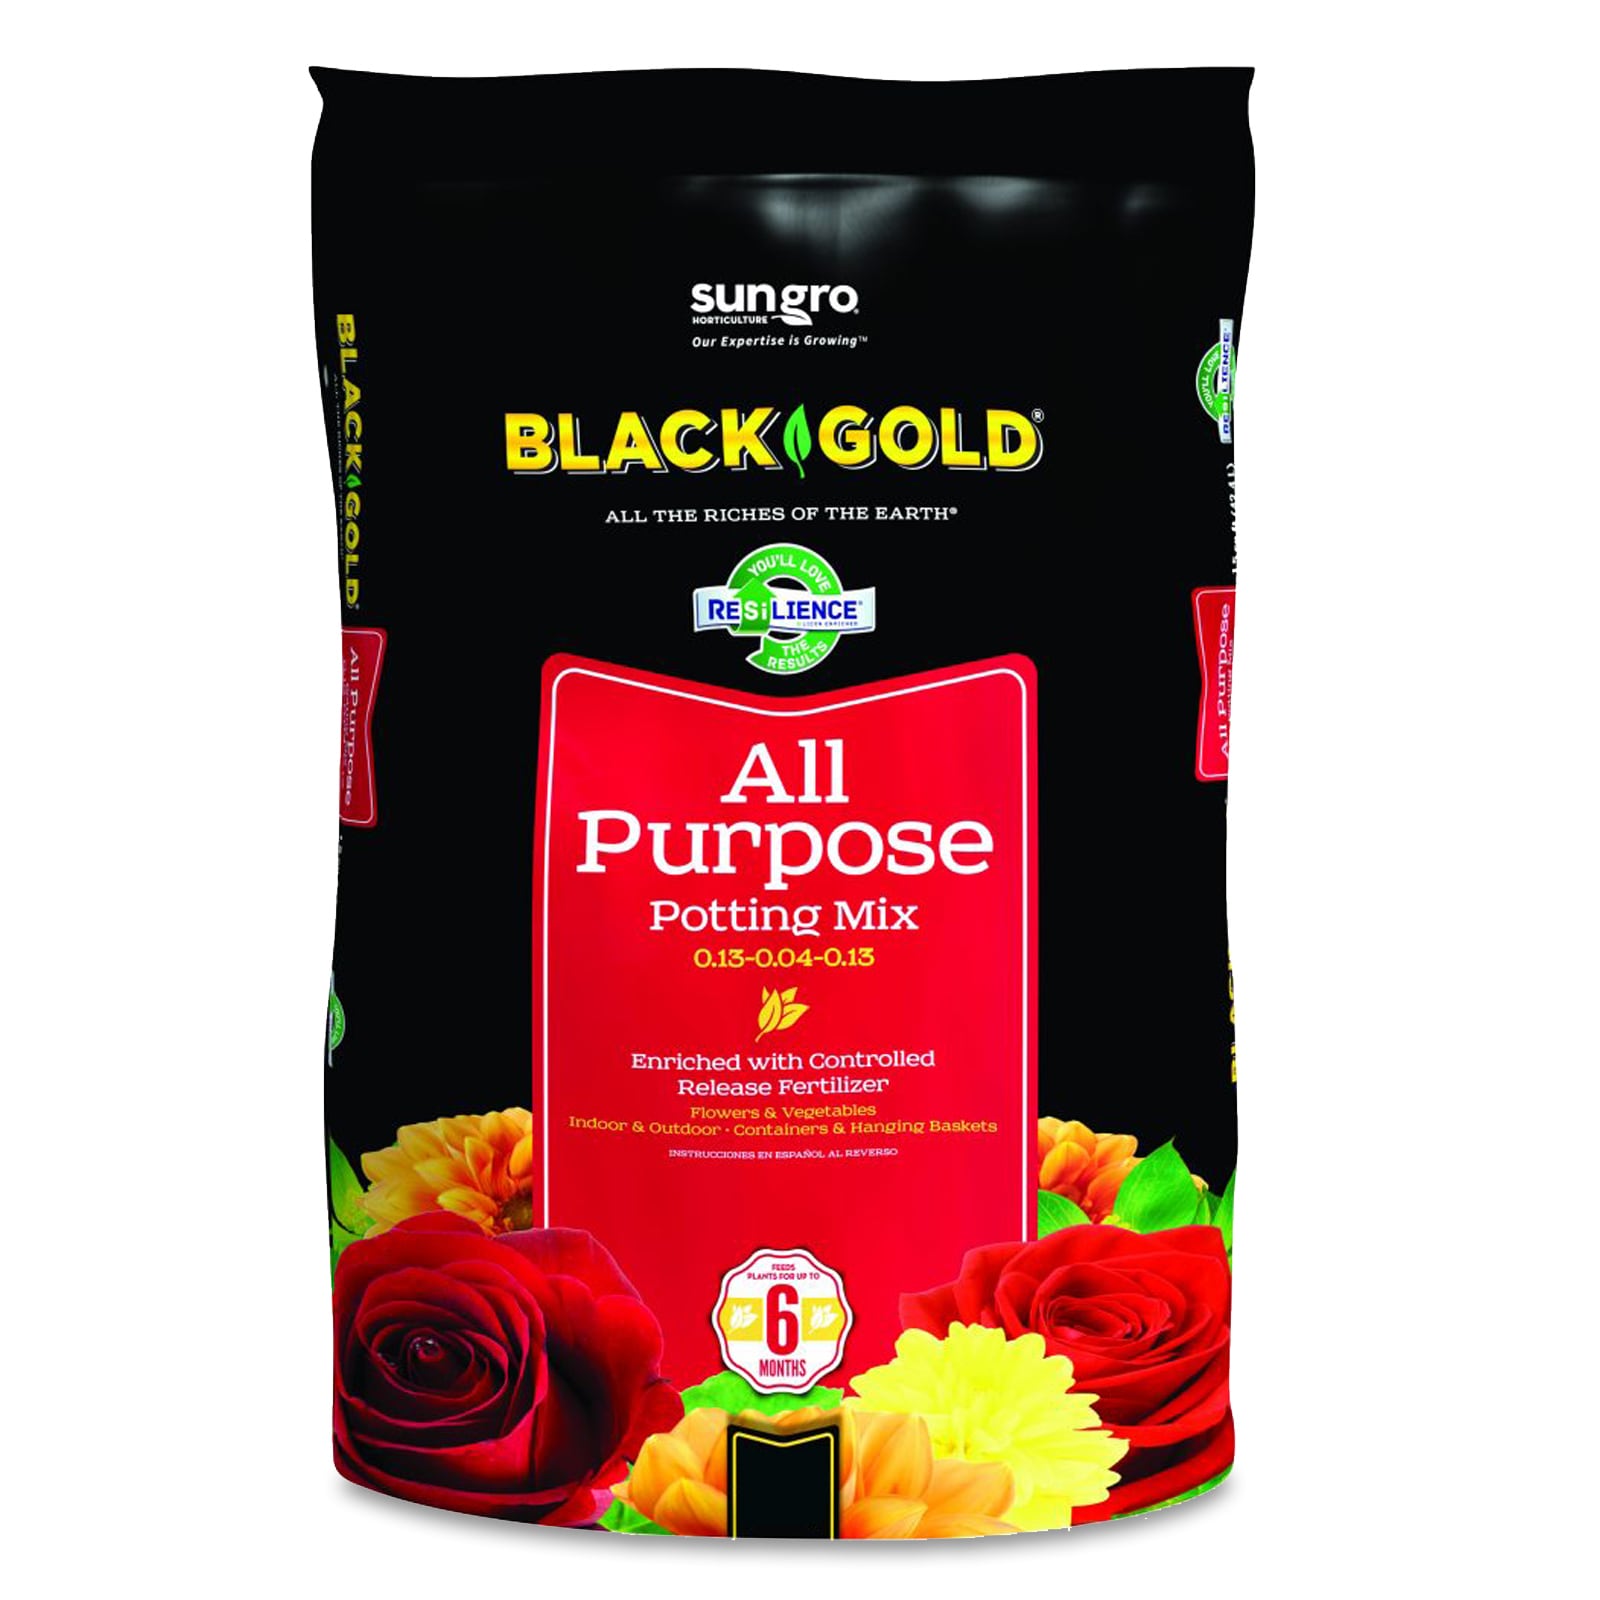 Image of Lowe's Black Gold All Purpose Potting Mix